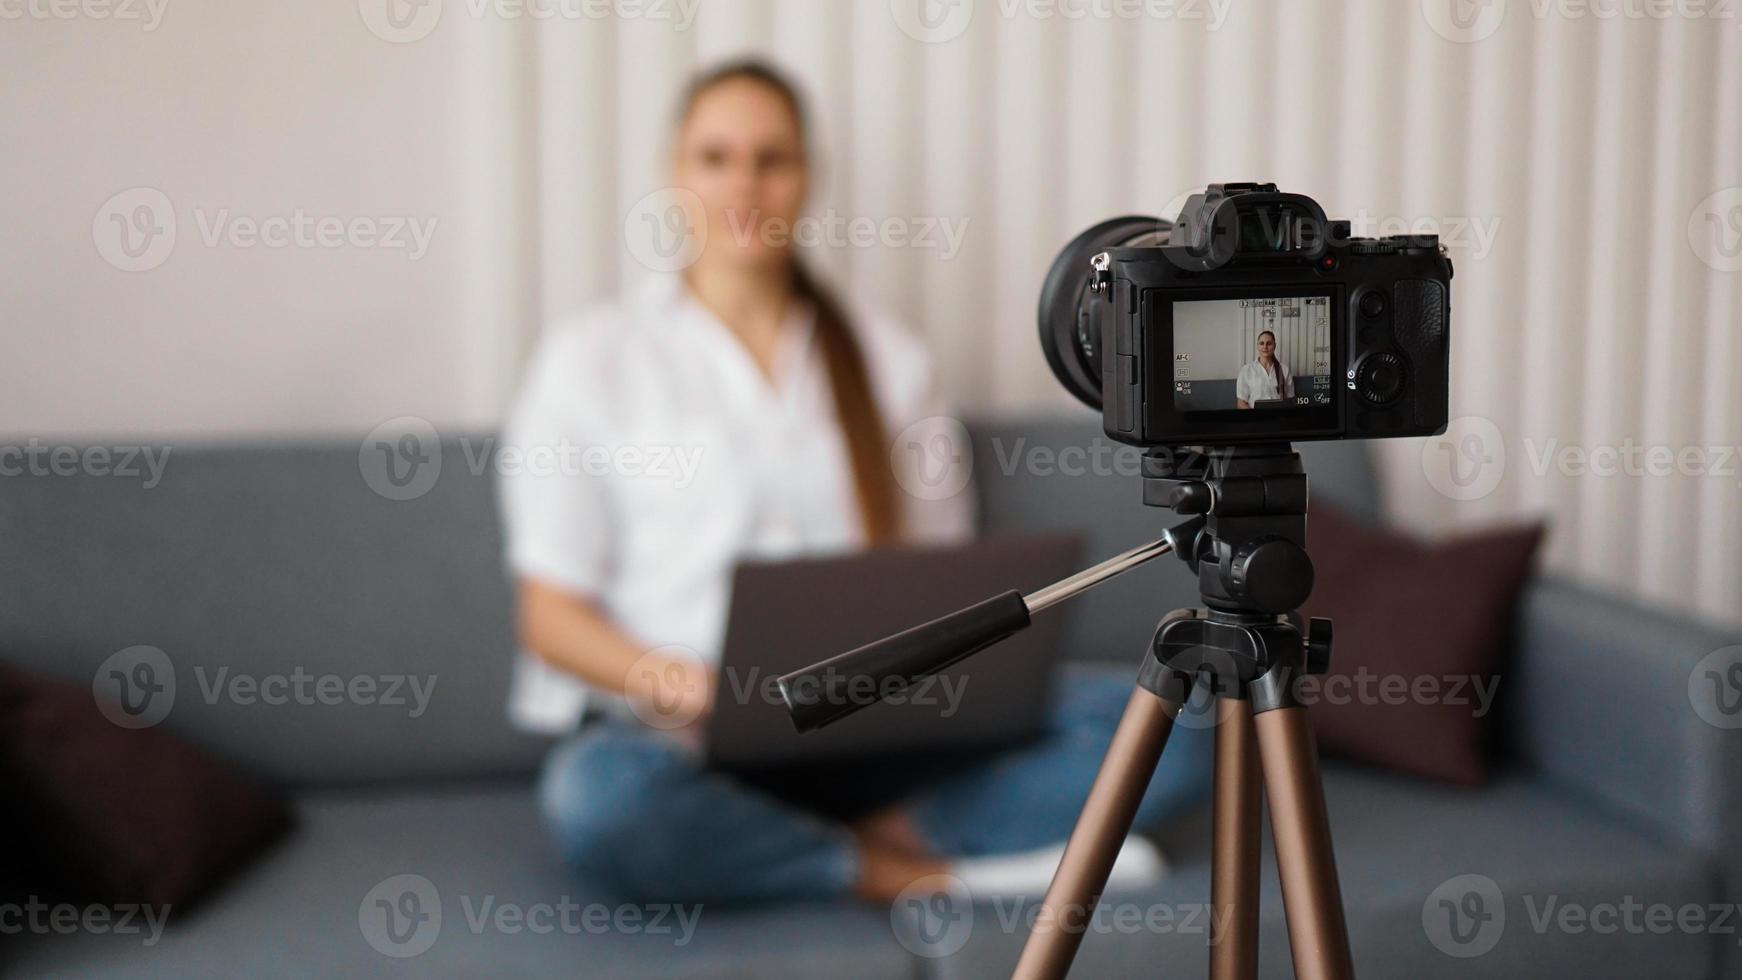 Blogger recording video indoors, selective focus on camera display photo